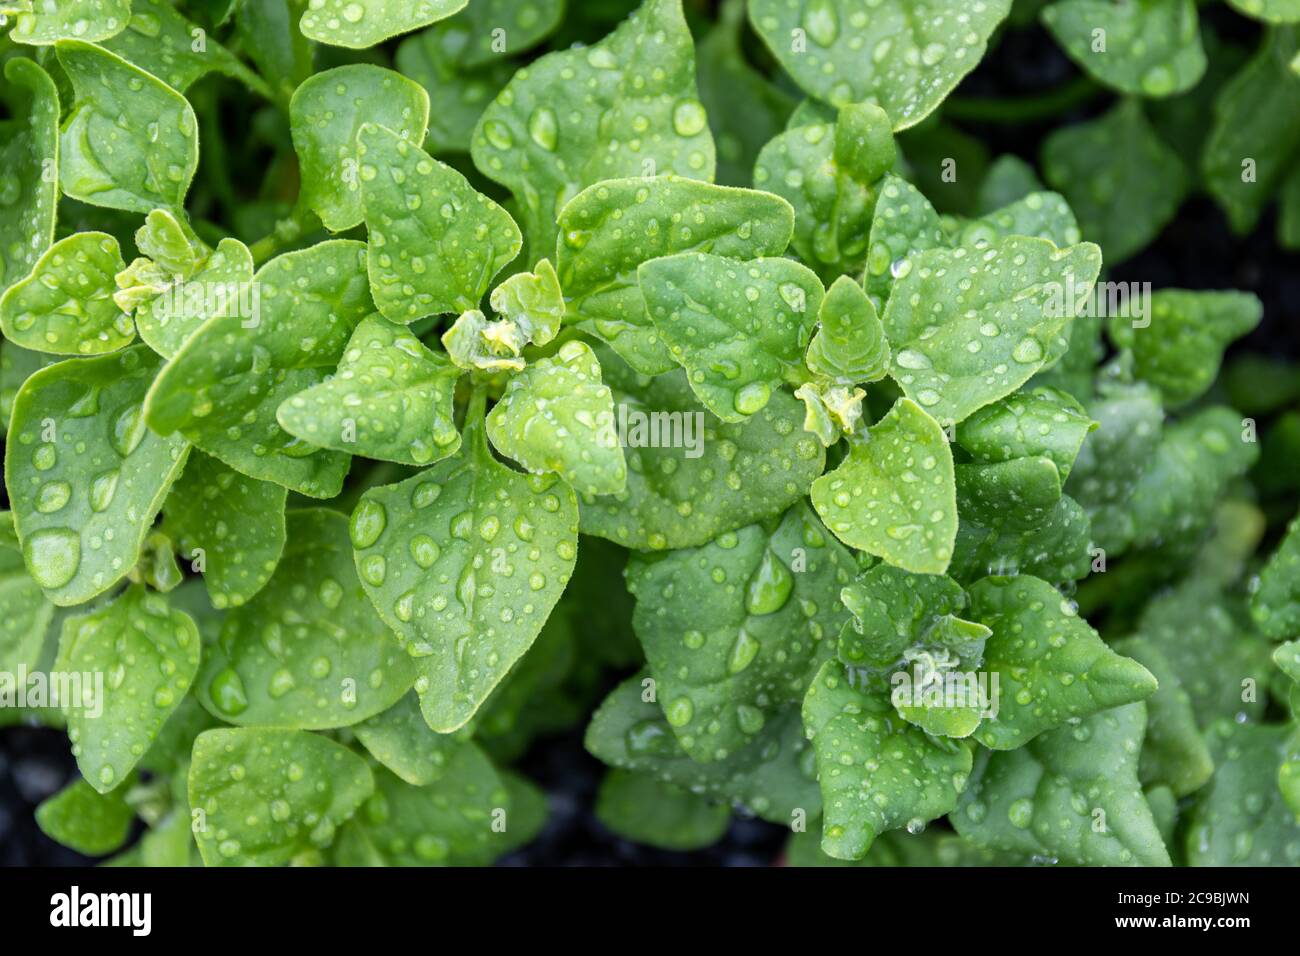 Water beads on Tetragonia tetragonoides leaves, plant also know as New Zealand spinach,  Botany Bay spinach, Cook's cabbage, sea spinach or tetragon Stock Photo